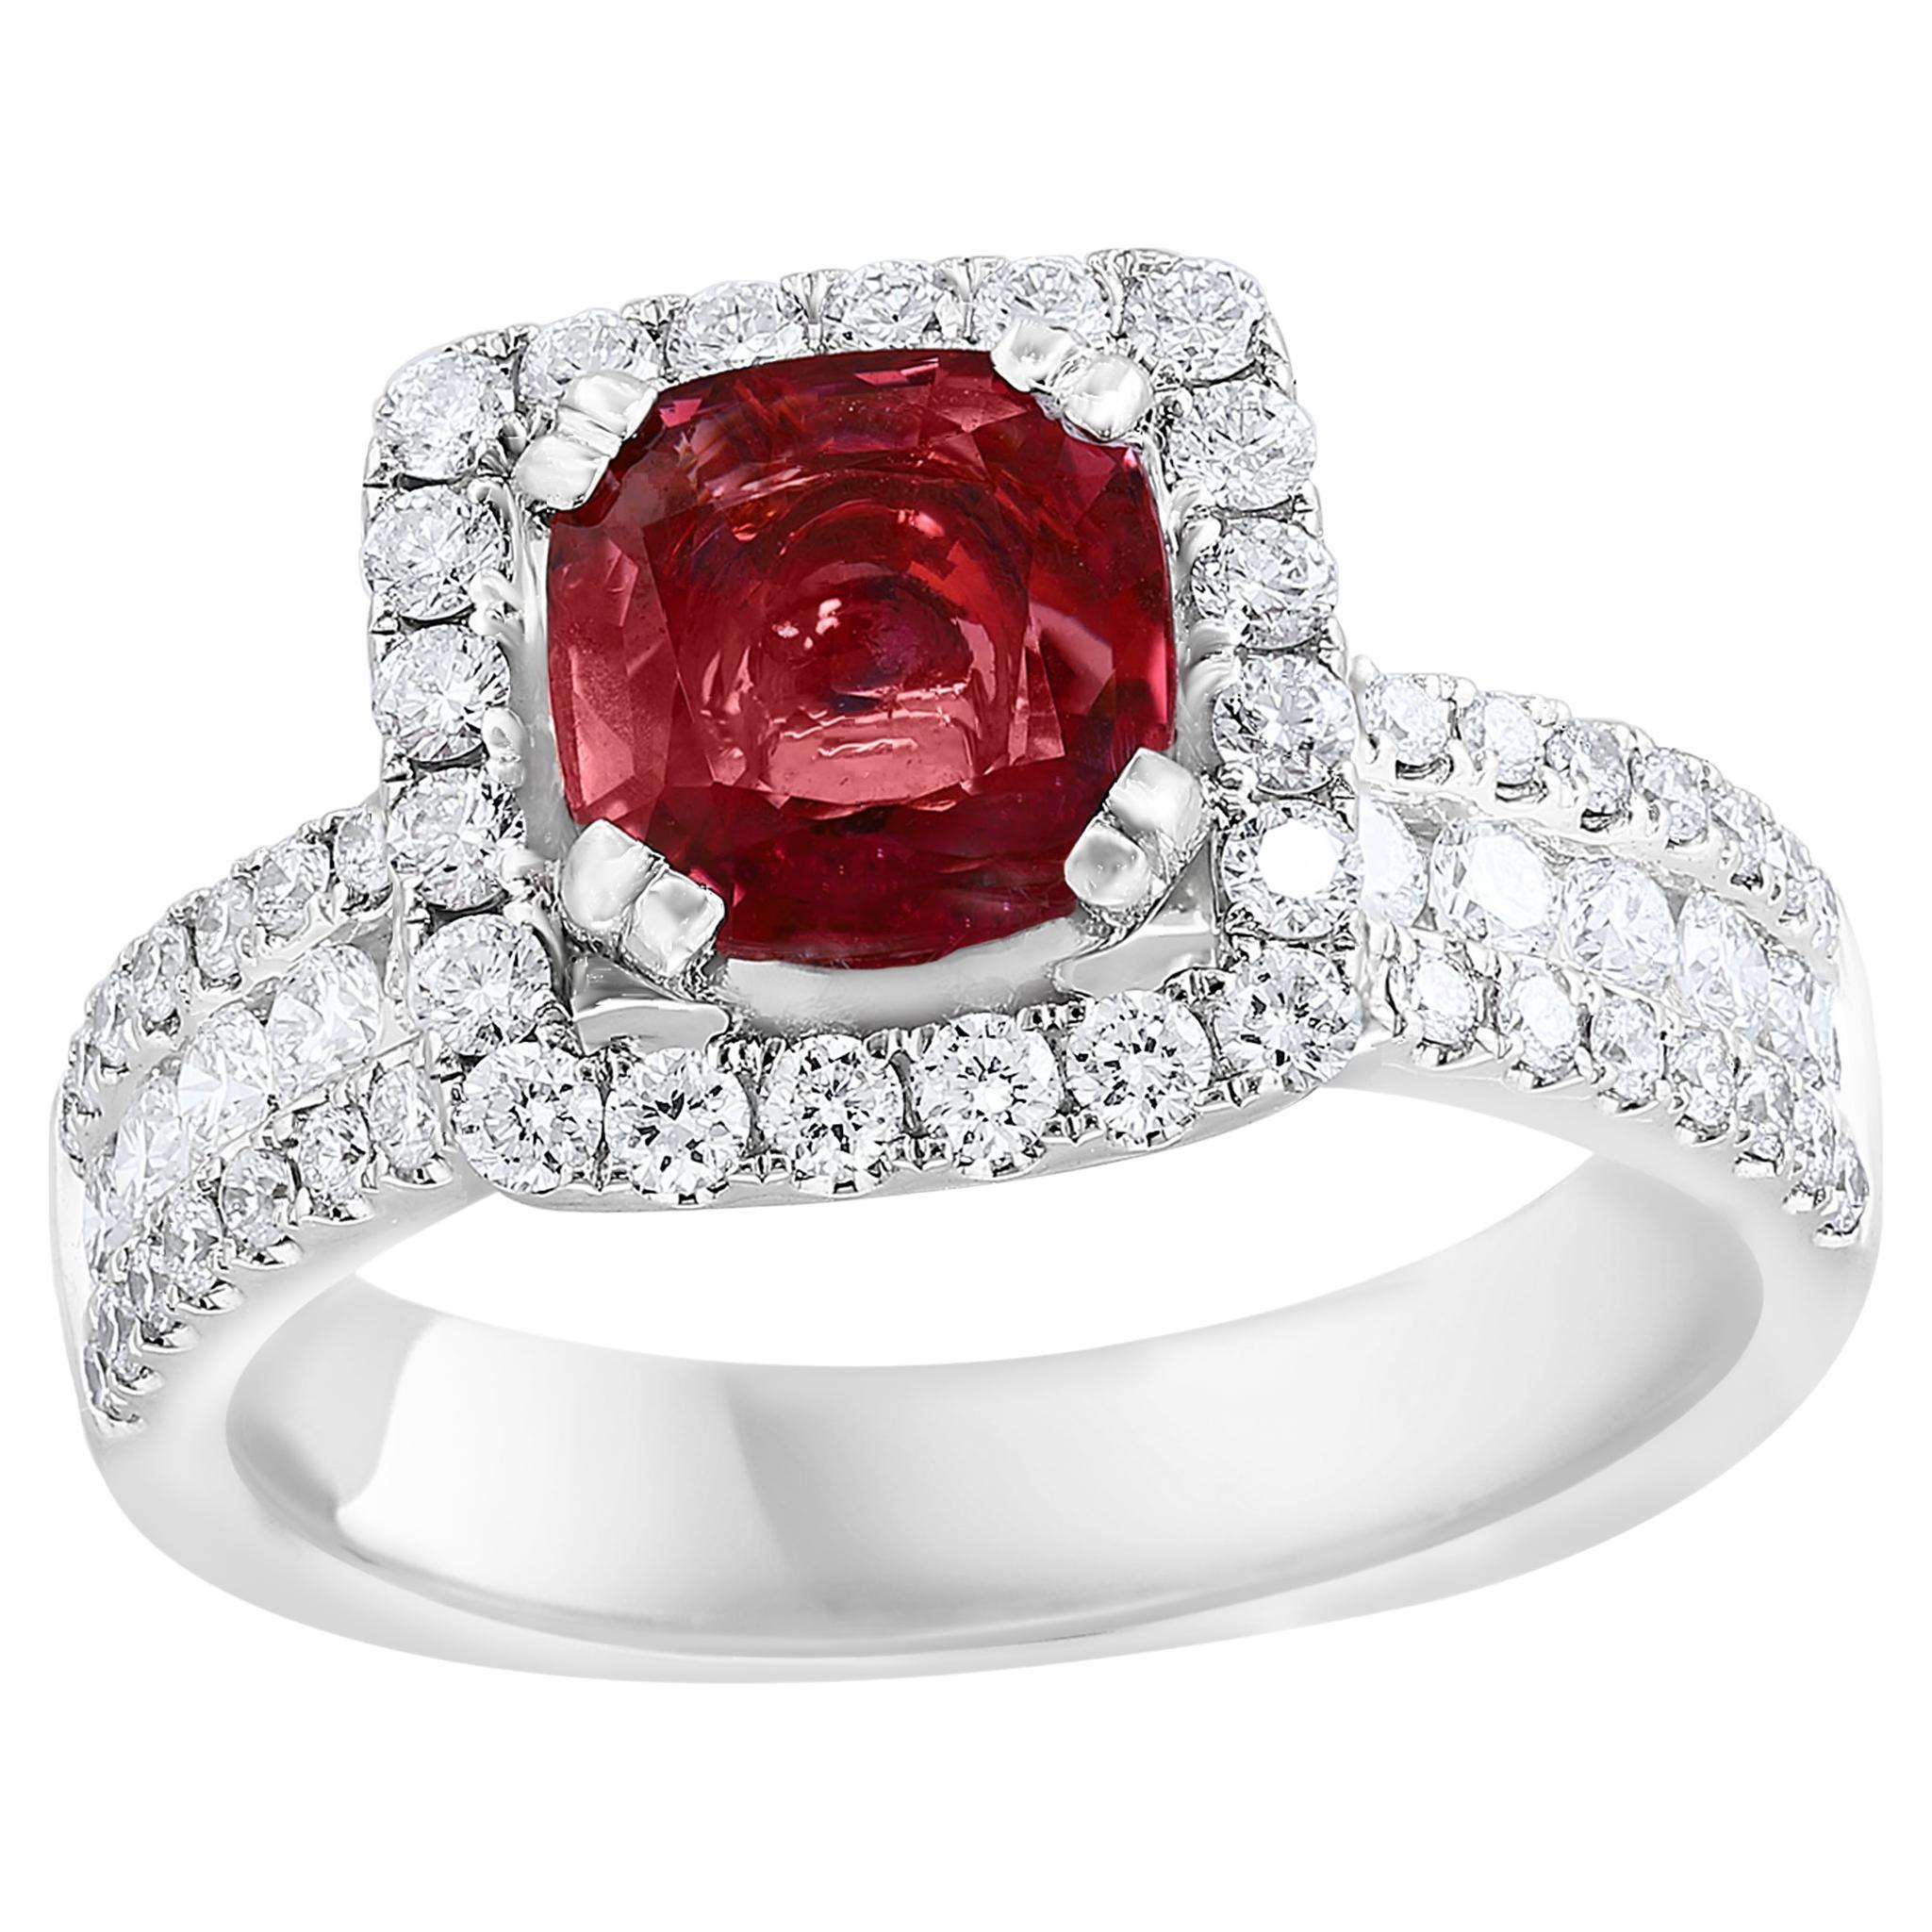 1.45 Carat Round Shape Ruby and Diamond Halo Ring in 18K White Gold